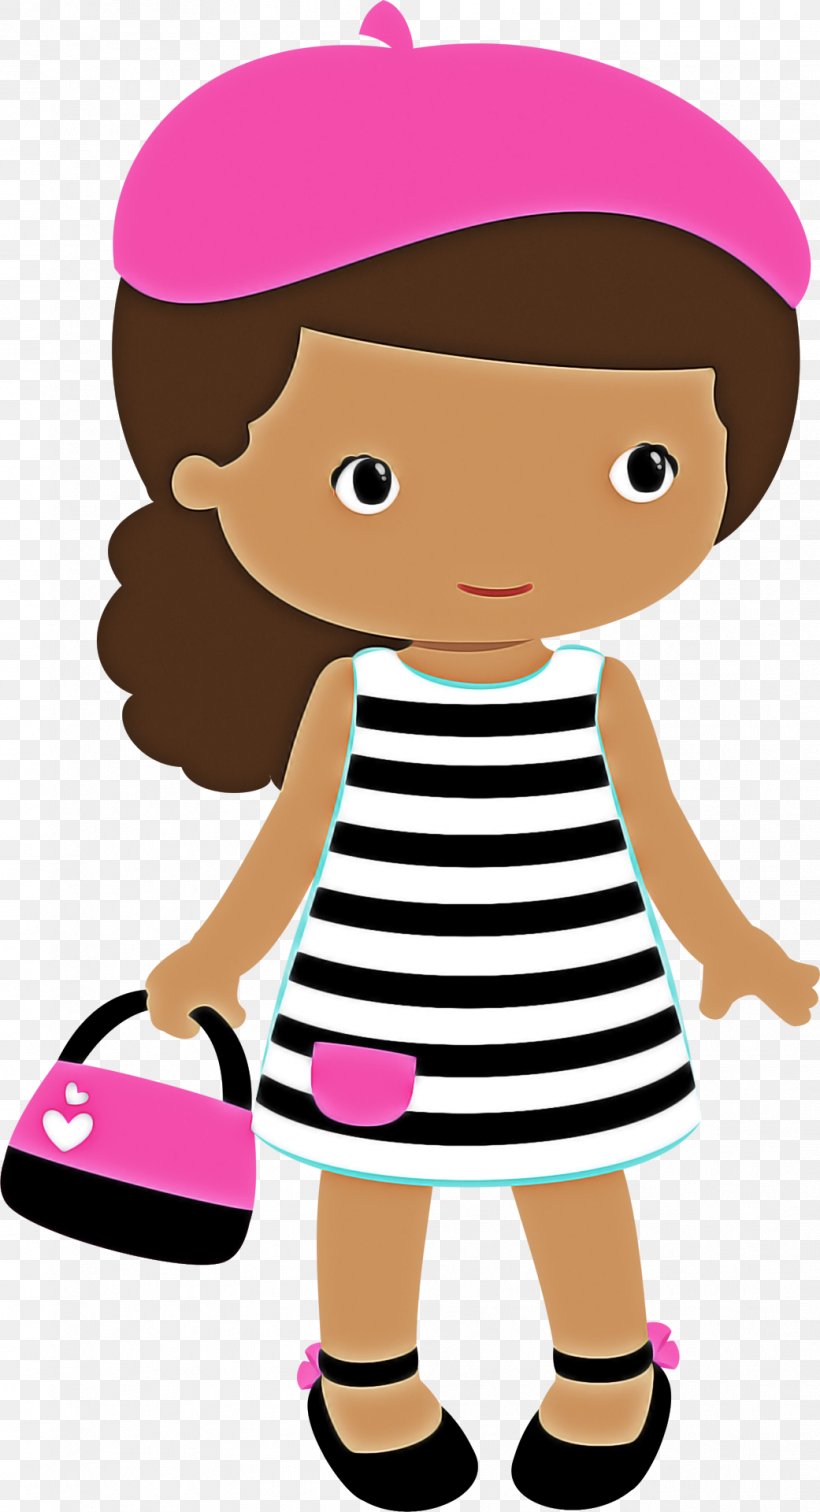 Cartoon Clip Art Pink Doll Child, PNG, 1041x1920px, Cartoon, Child, Doll, Pink, Play Download Free